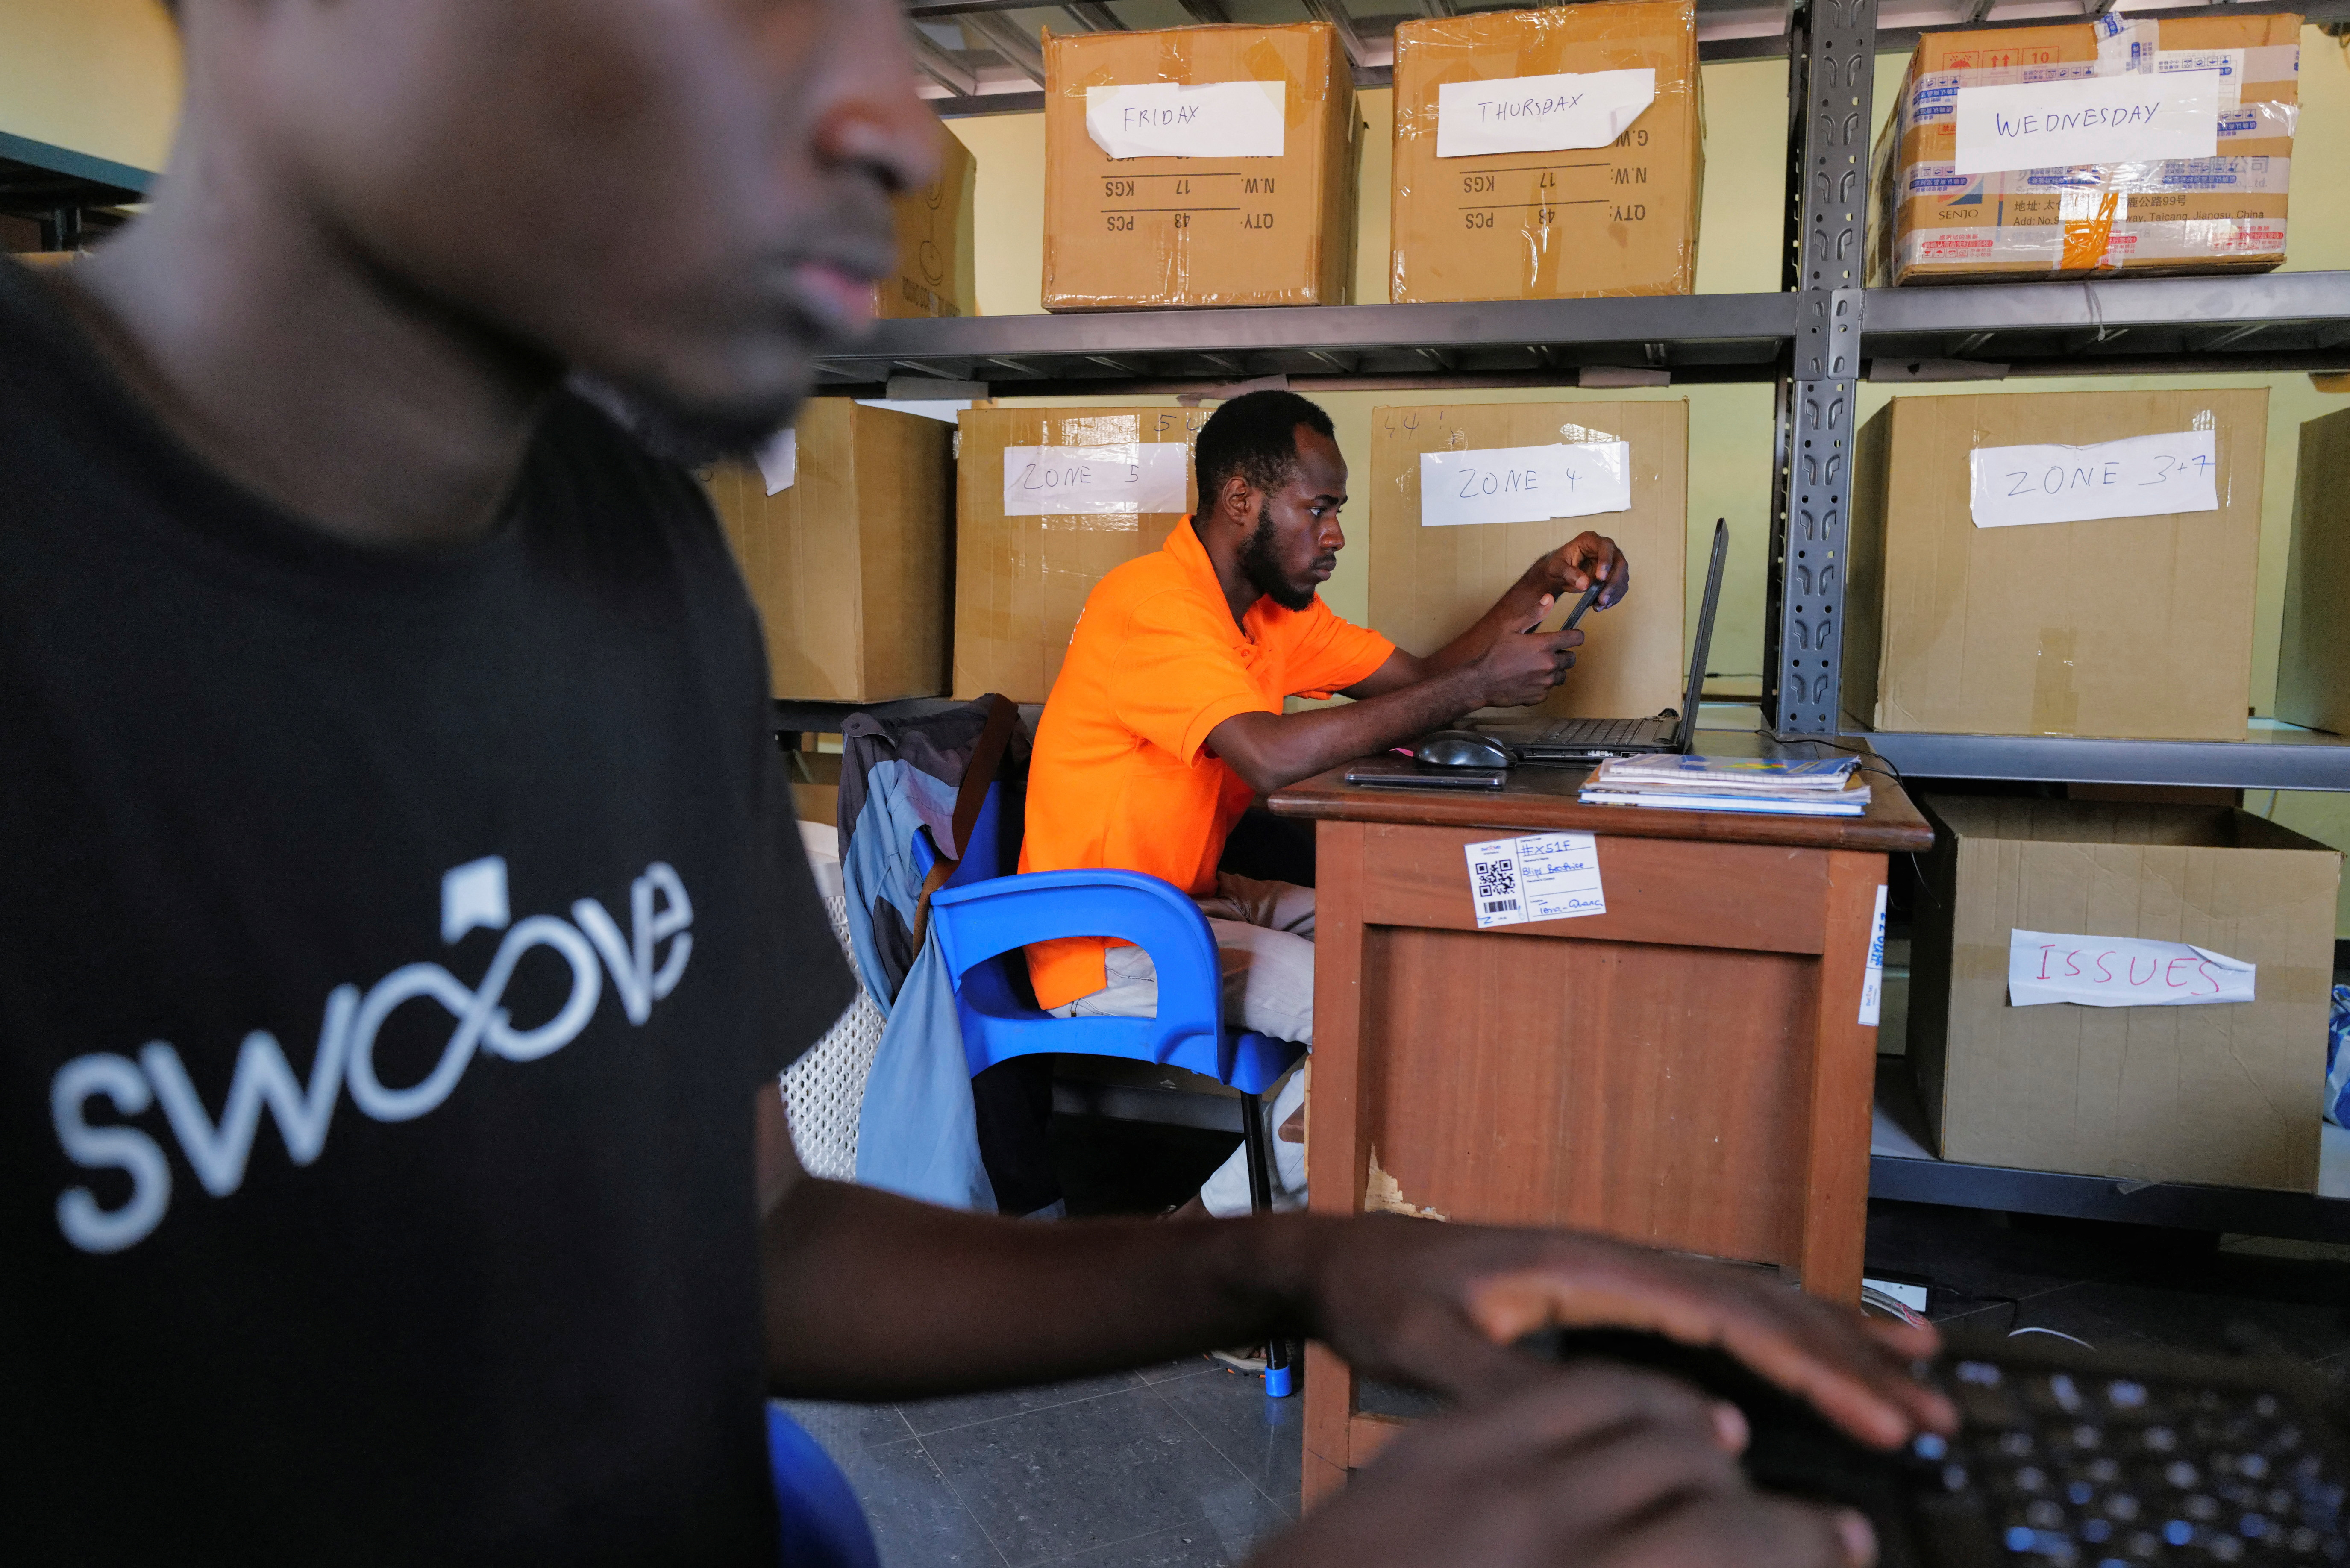 Ghana’s Swoove says set to ship development after startup contest